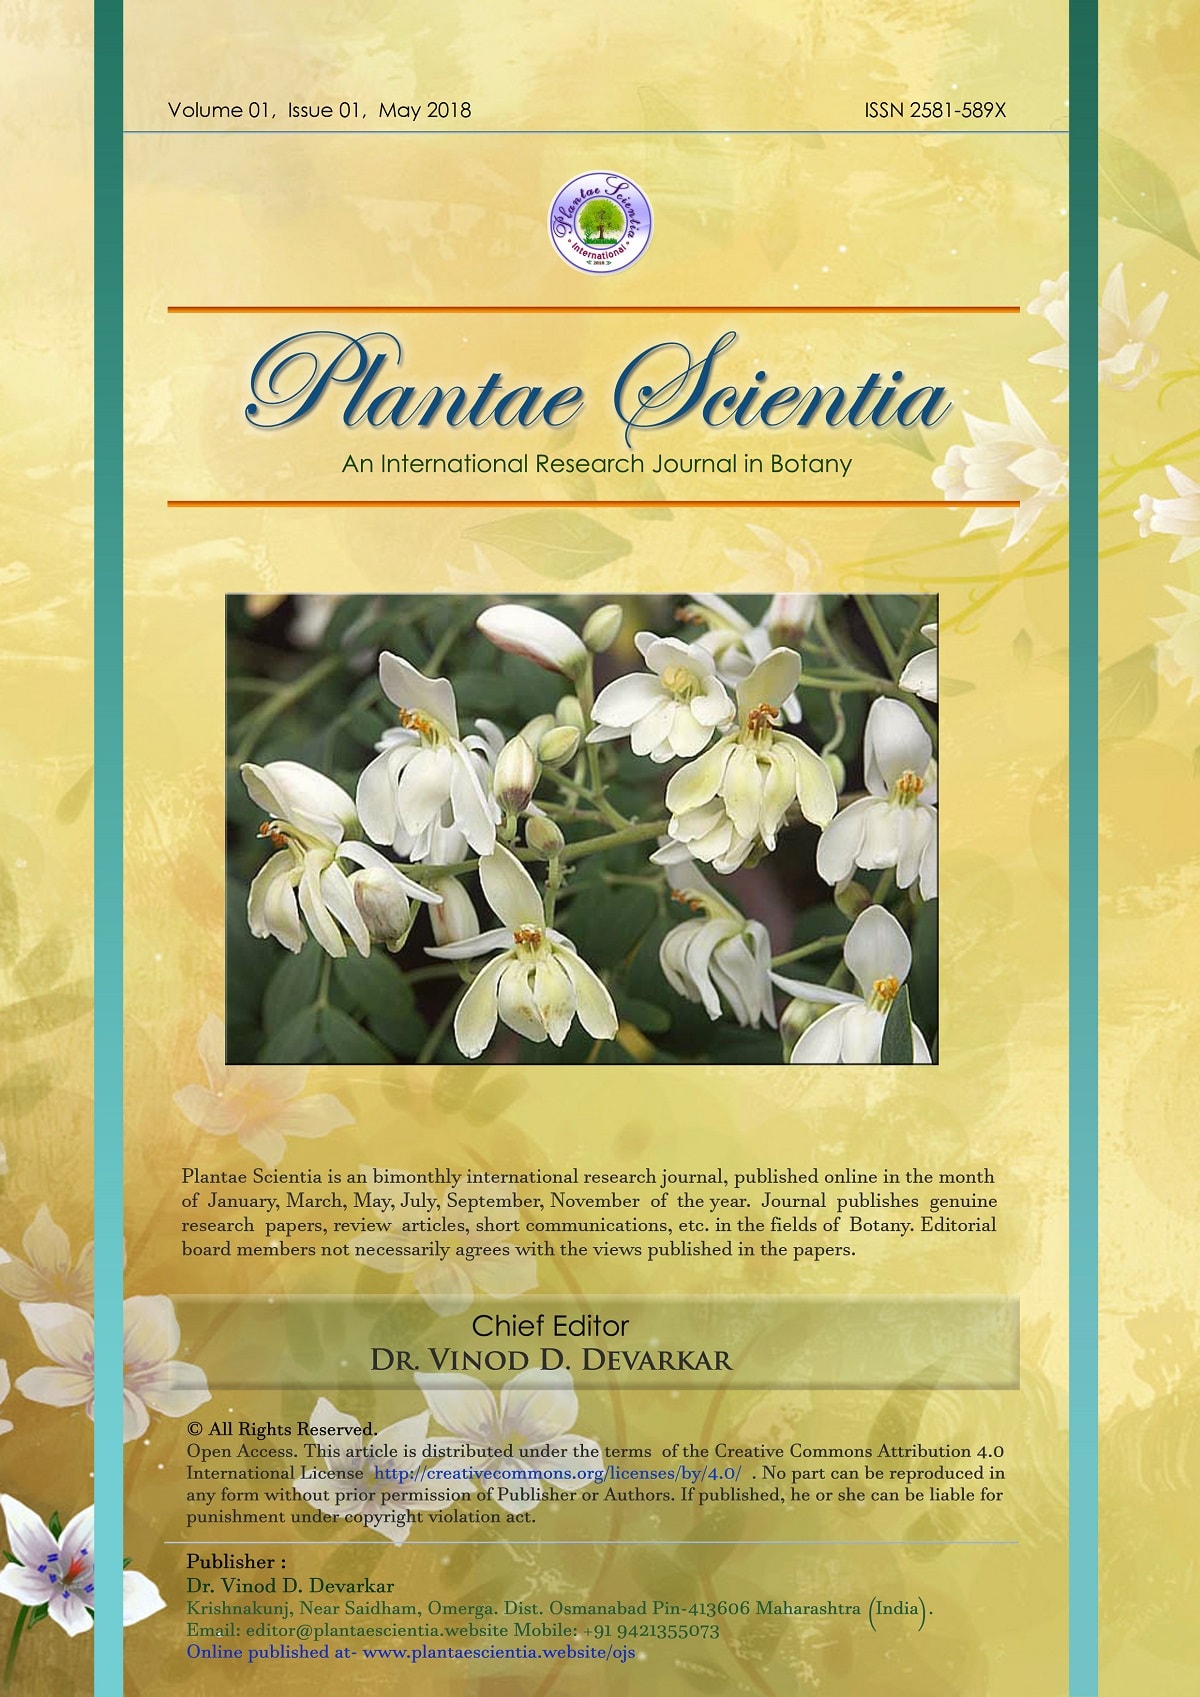 Plantae Scientia is a bimonthly international research journal, published online on every 1st  January,                1st March, 1st May, 1st July, 1st September, 1st November of the year. Journal publishes genuine research papers, review articles, short communications, etc. in the fields of Botany.